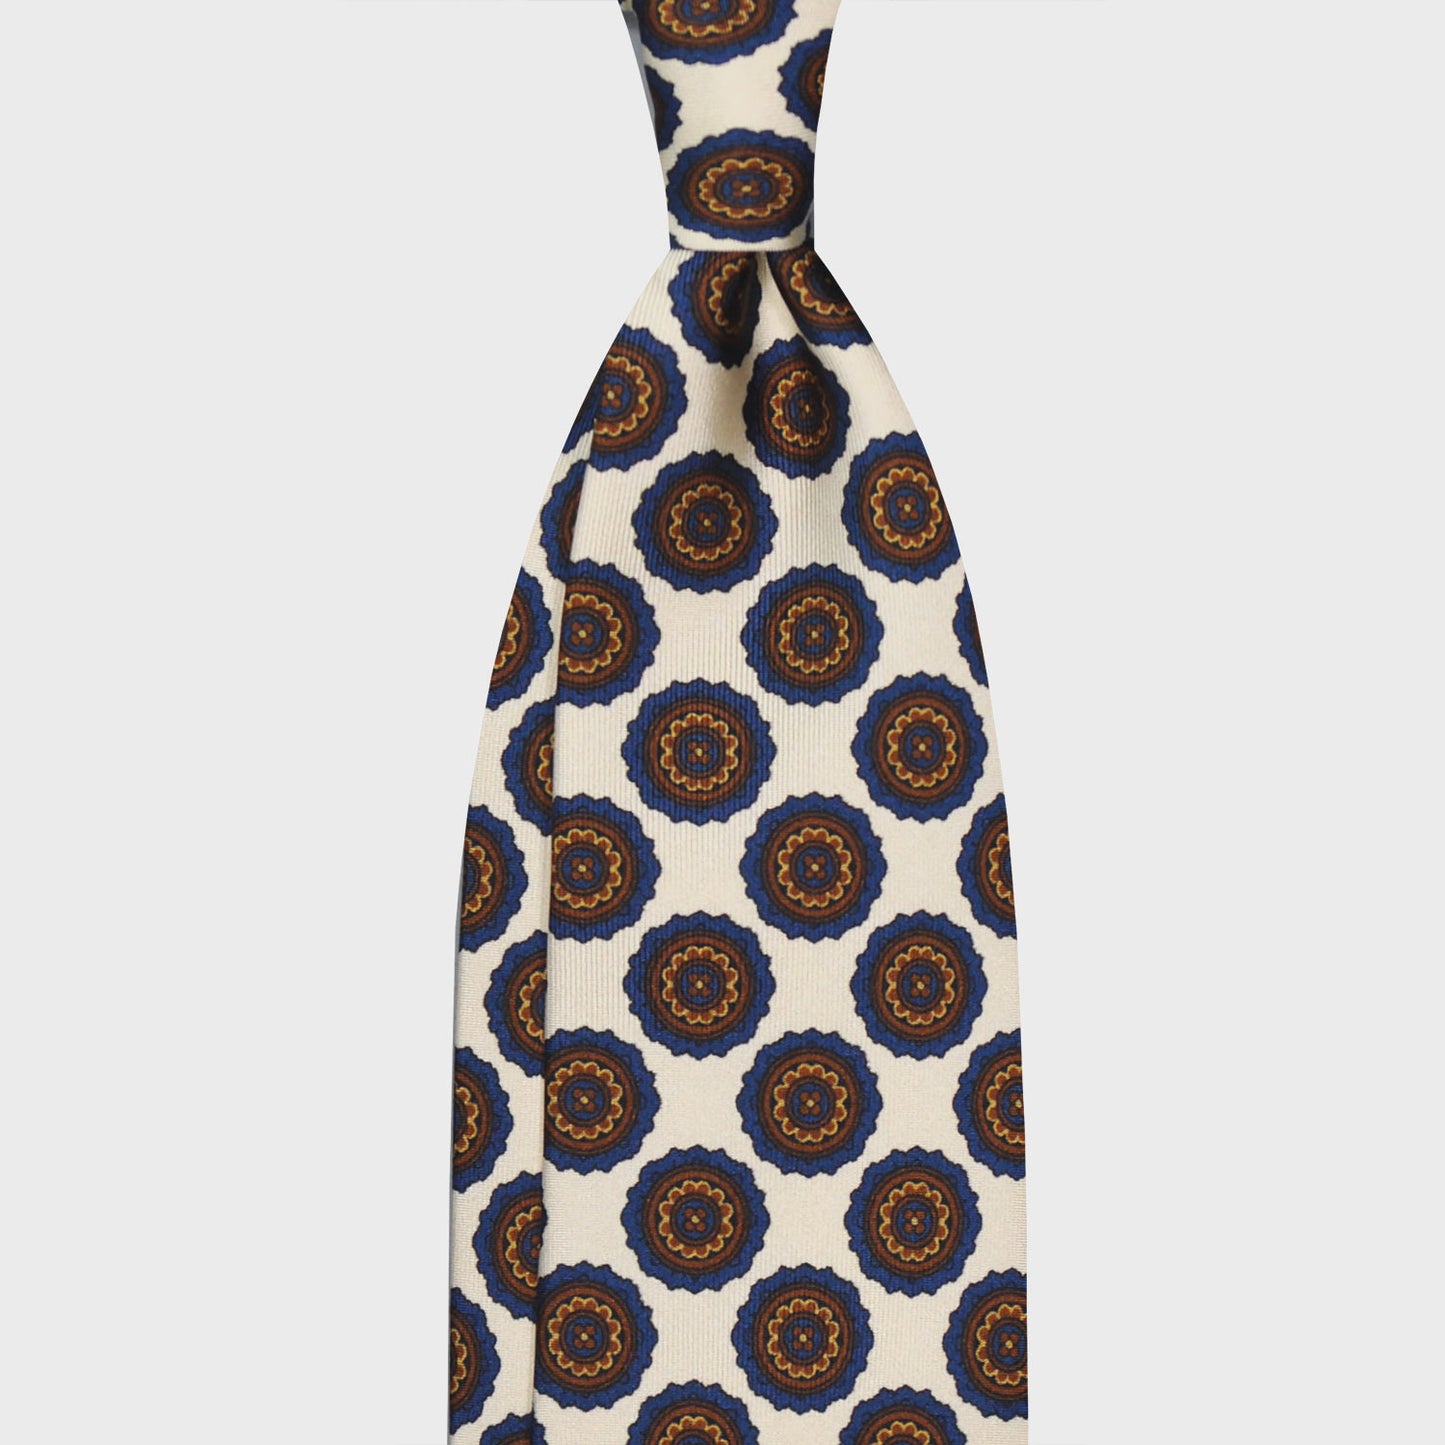 White Medallions Silk Tie. Men's white silk tie made with finest Italian silk soft to the touch, unlined tie 3 folds, refined medallions printed pattern cobalt blue and brown, classic handmade tie F.Marino Napoli exclusive for Wools Boutique Uomo